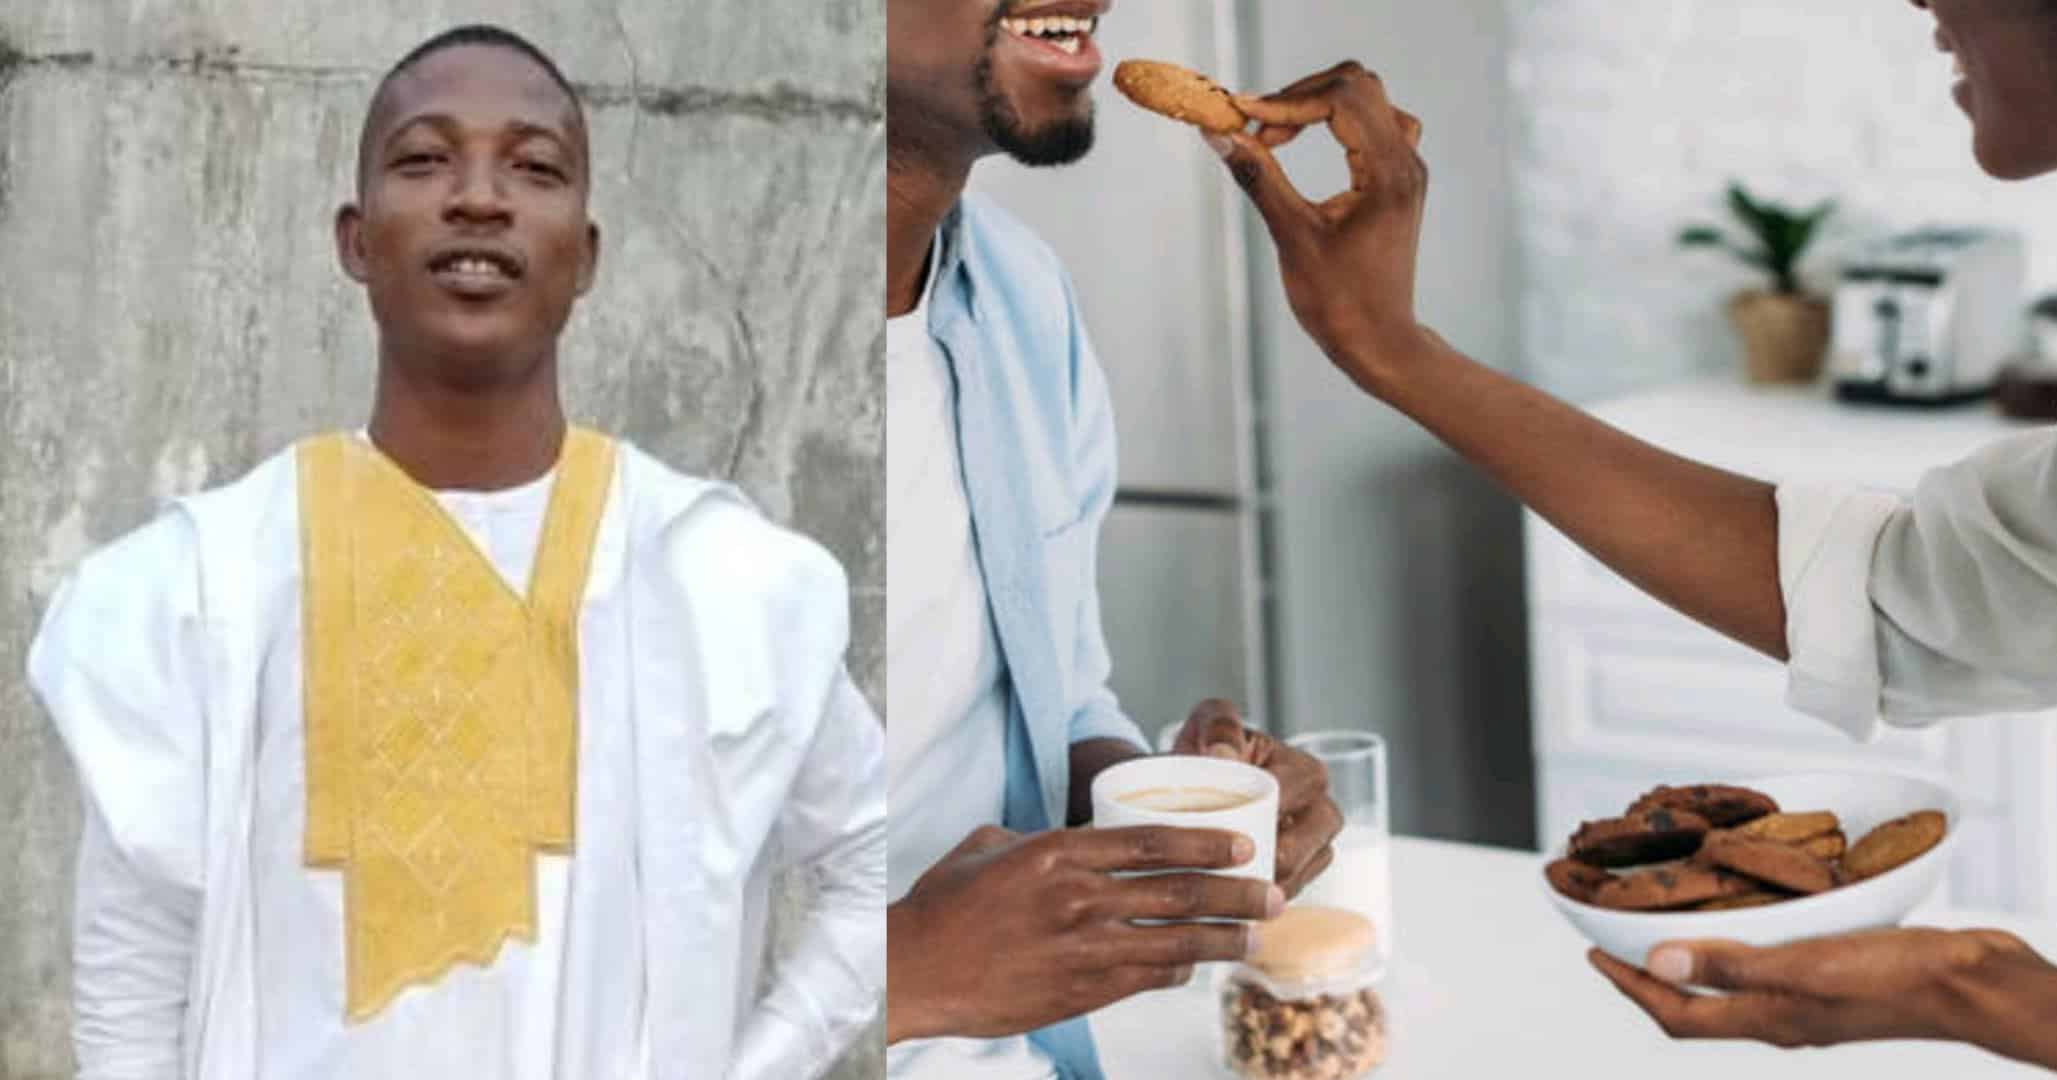 "She spoon feeds me, gives me her salary and I give her pocket money from it" – Man shares reasons he's thankful for his wife